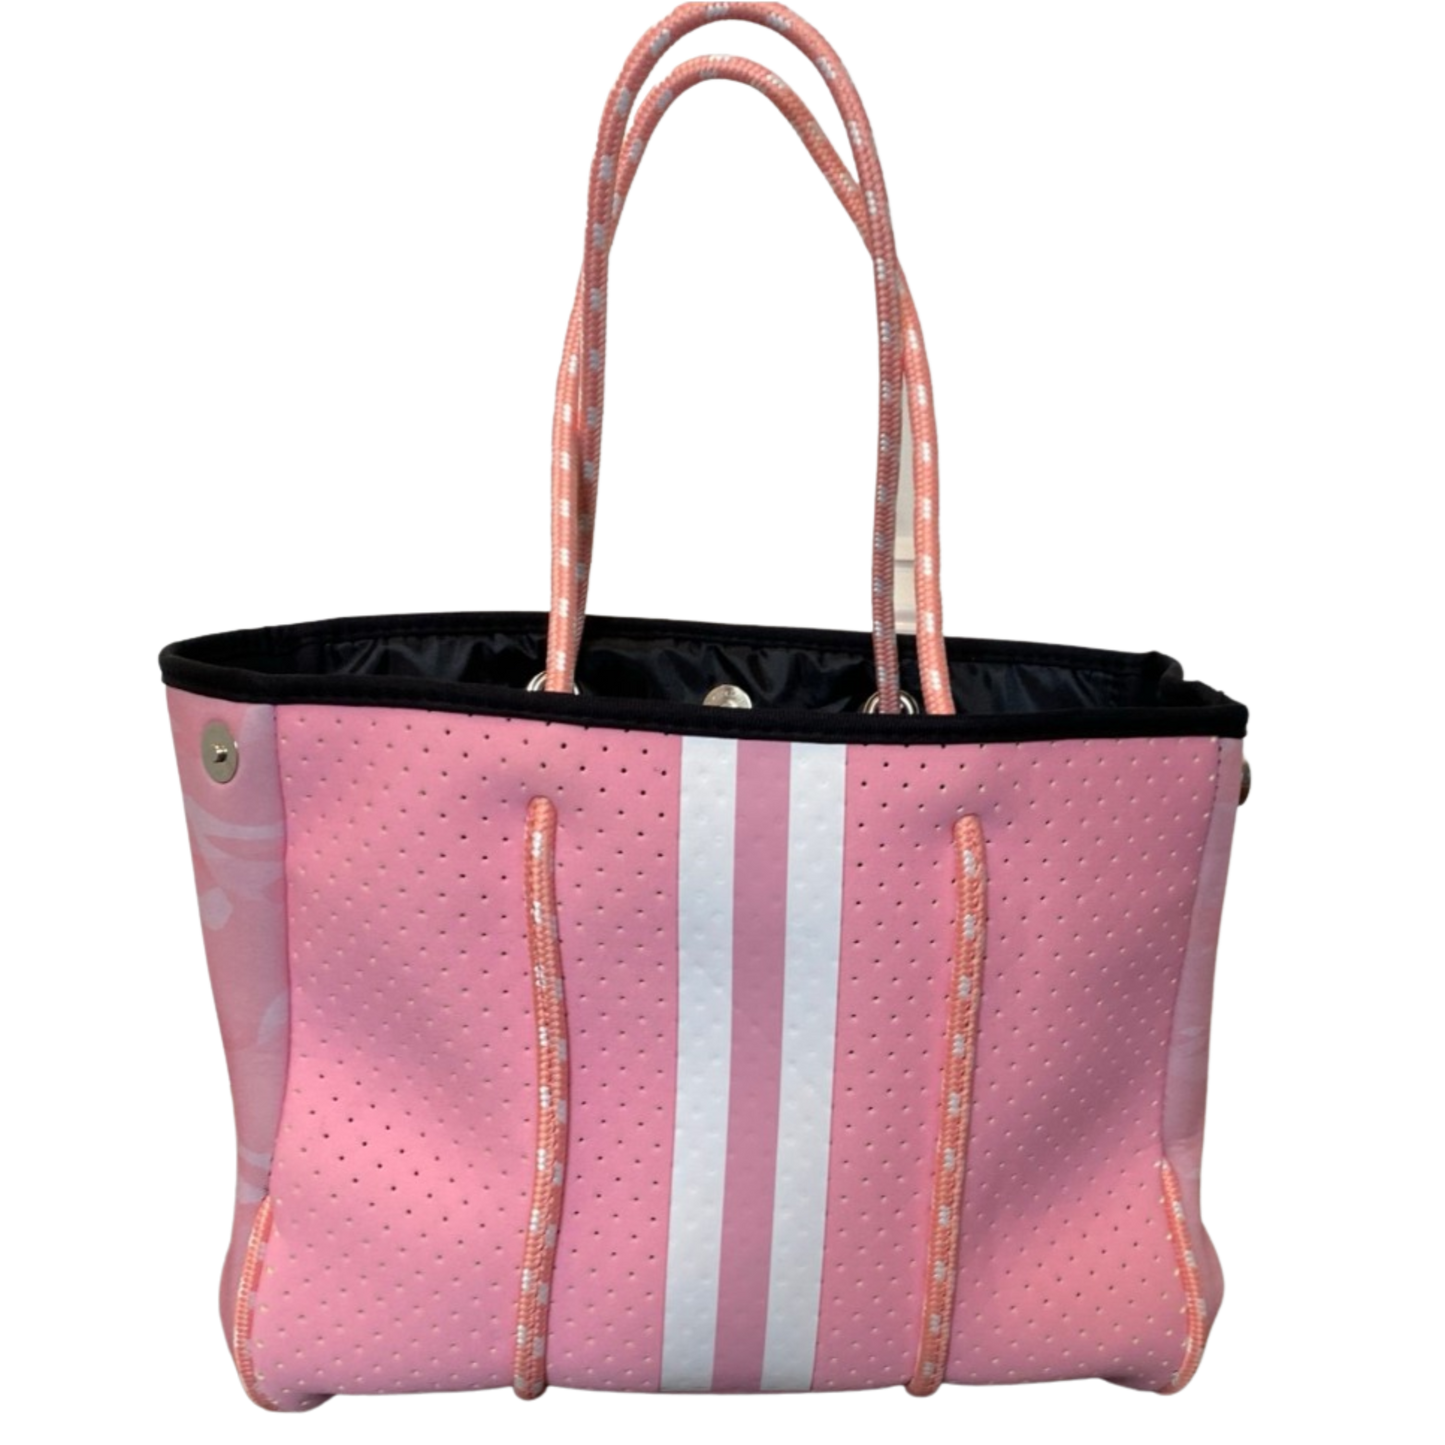 Neoprene Tote Bag Kids & Tween Sized Pink & Camo sides by Dallas Hill Design